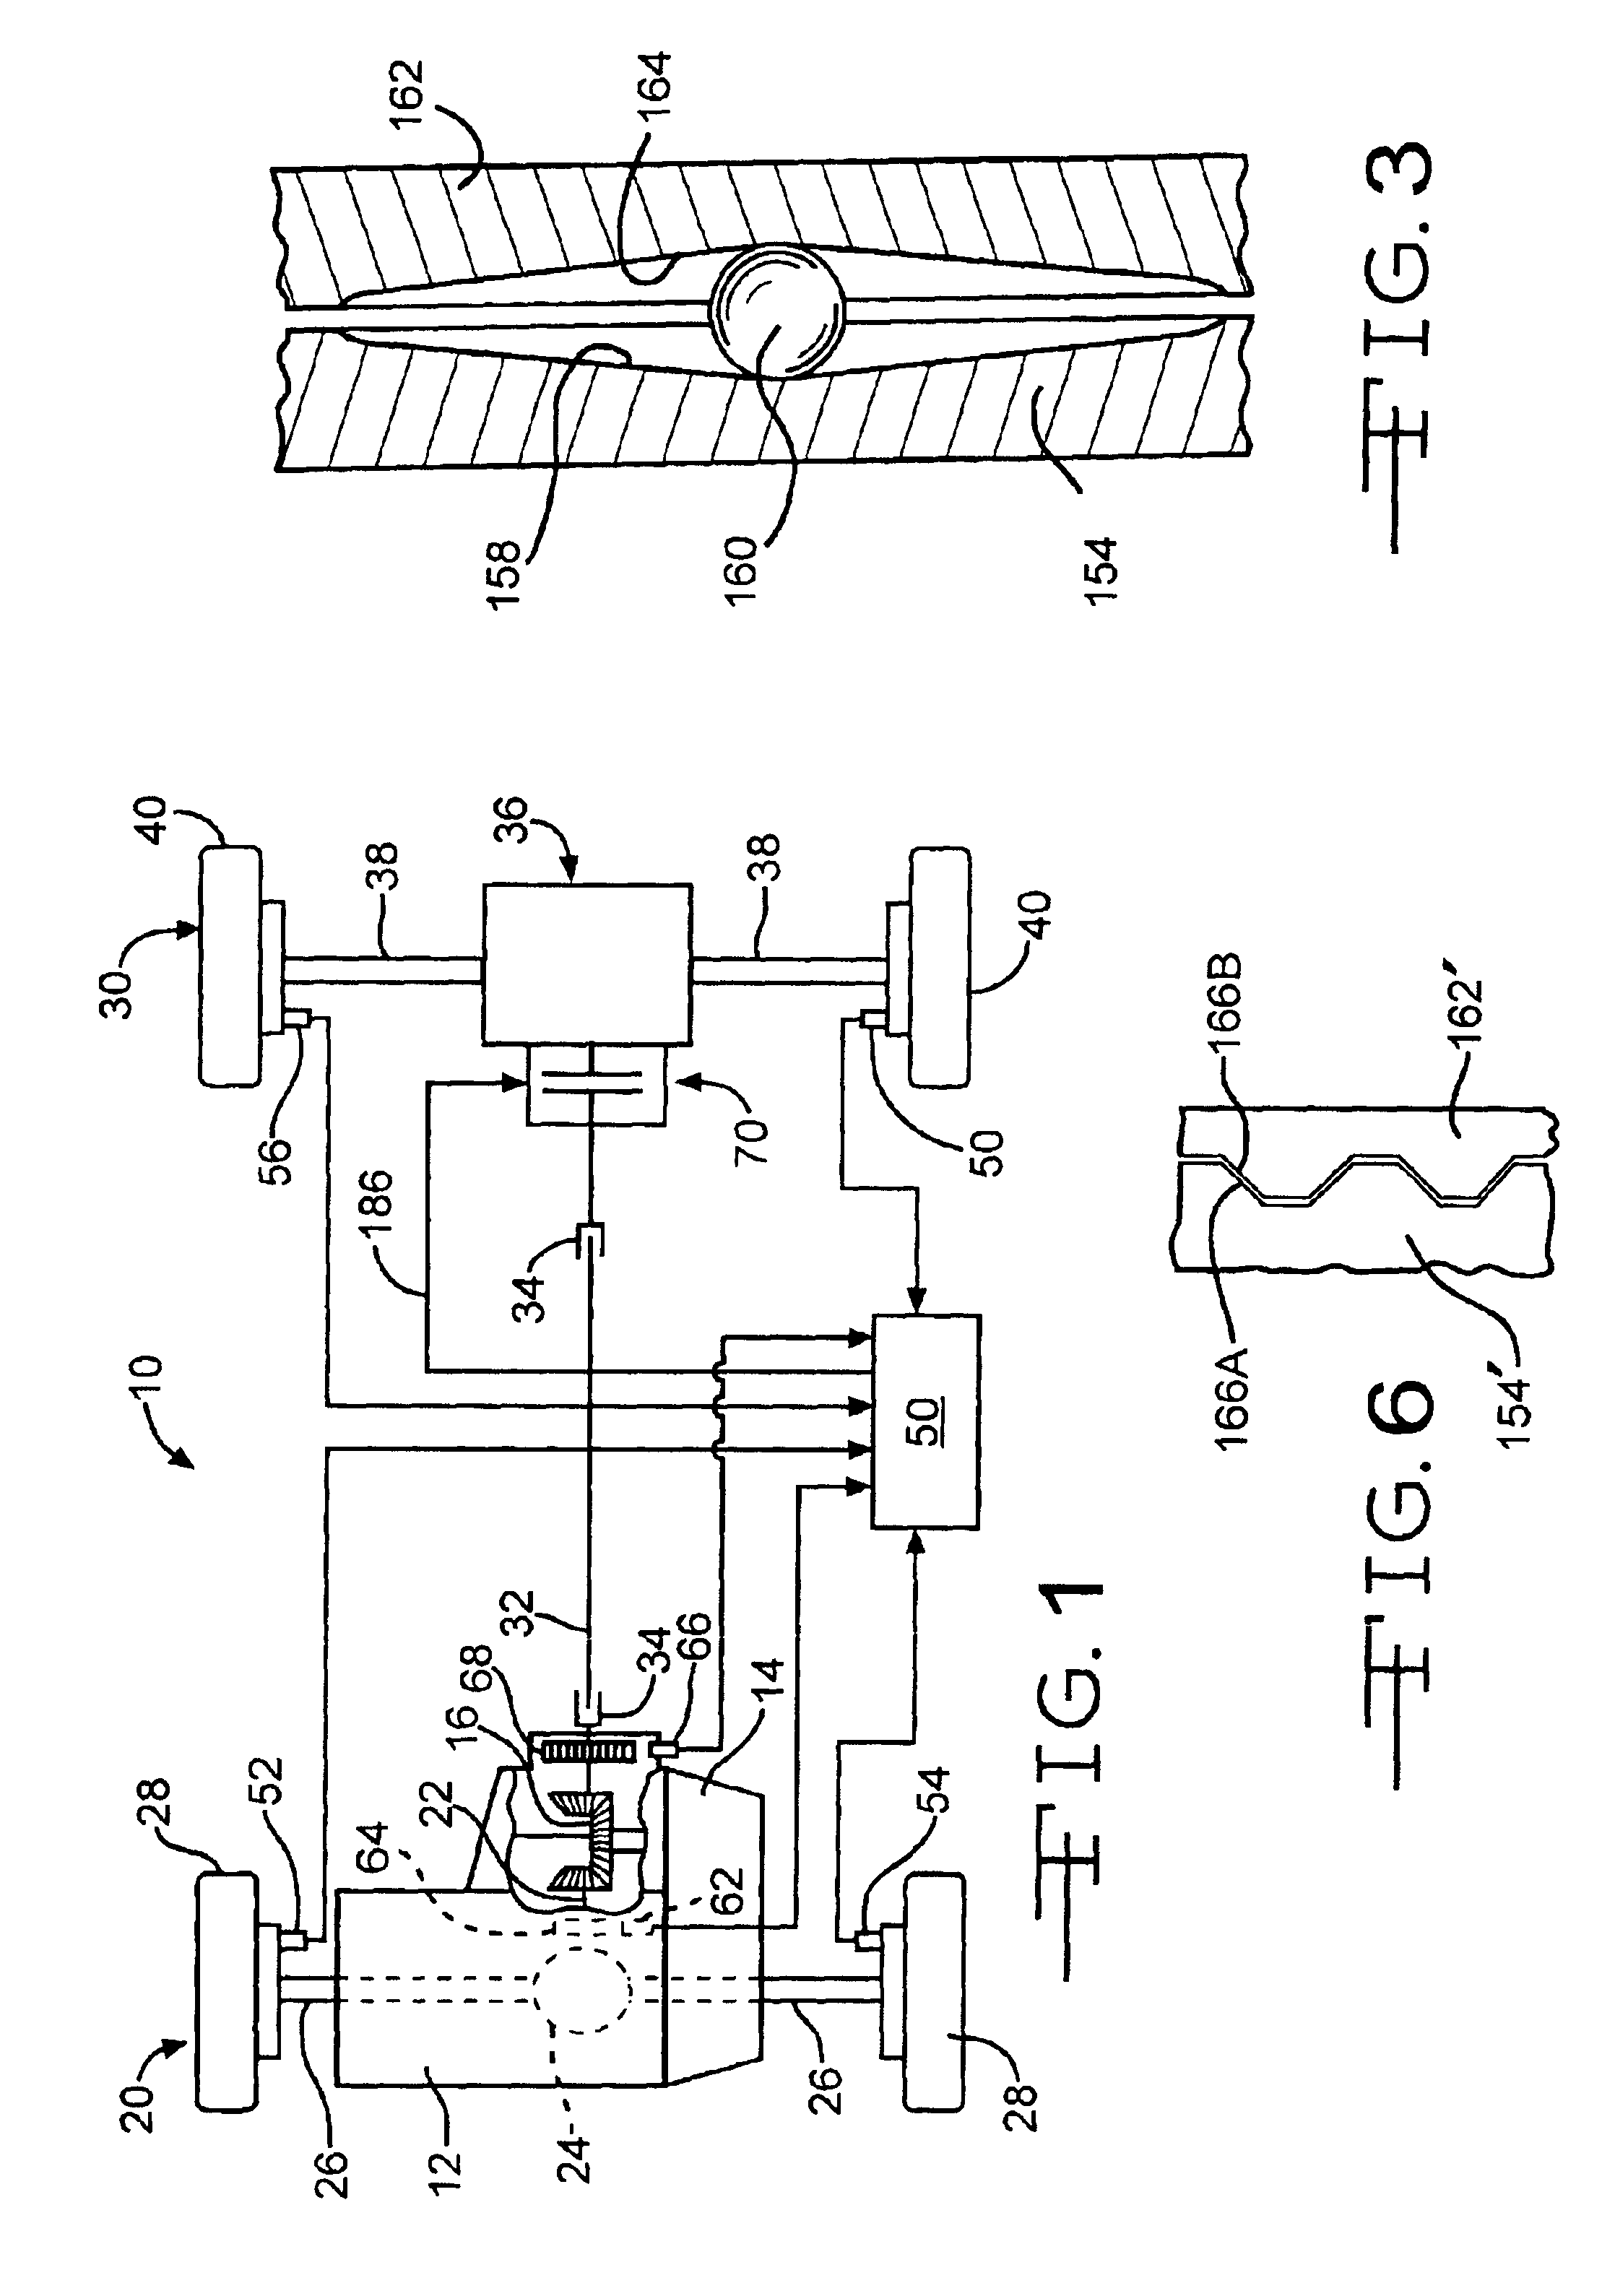 Electromagnetic clutch assembly having solenoid type operator